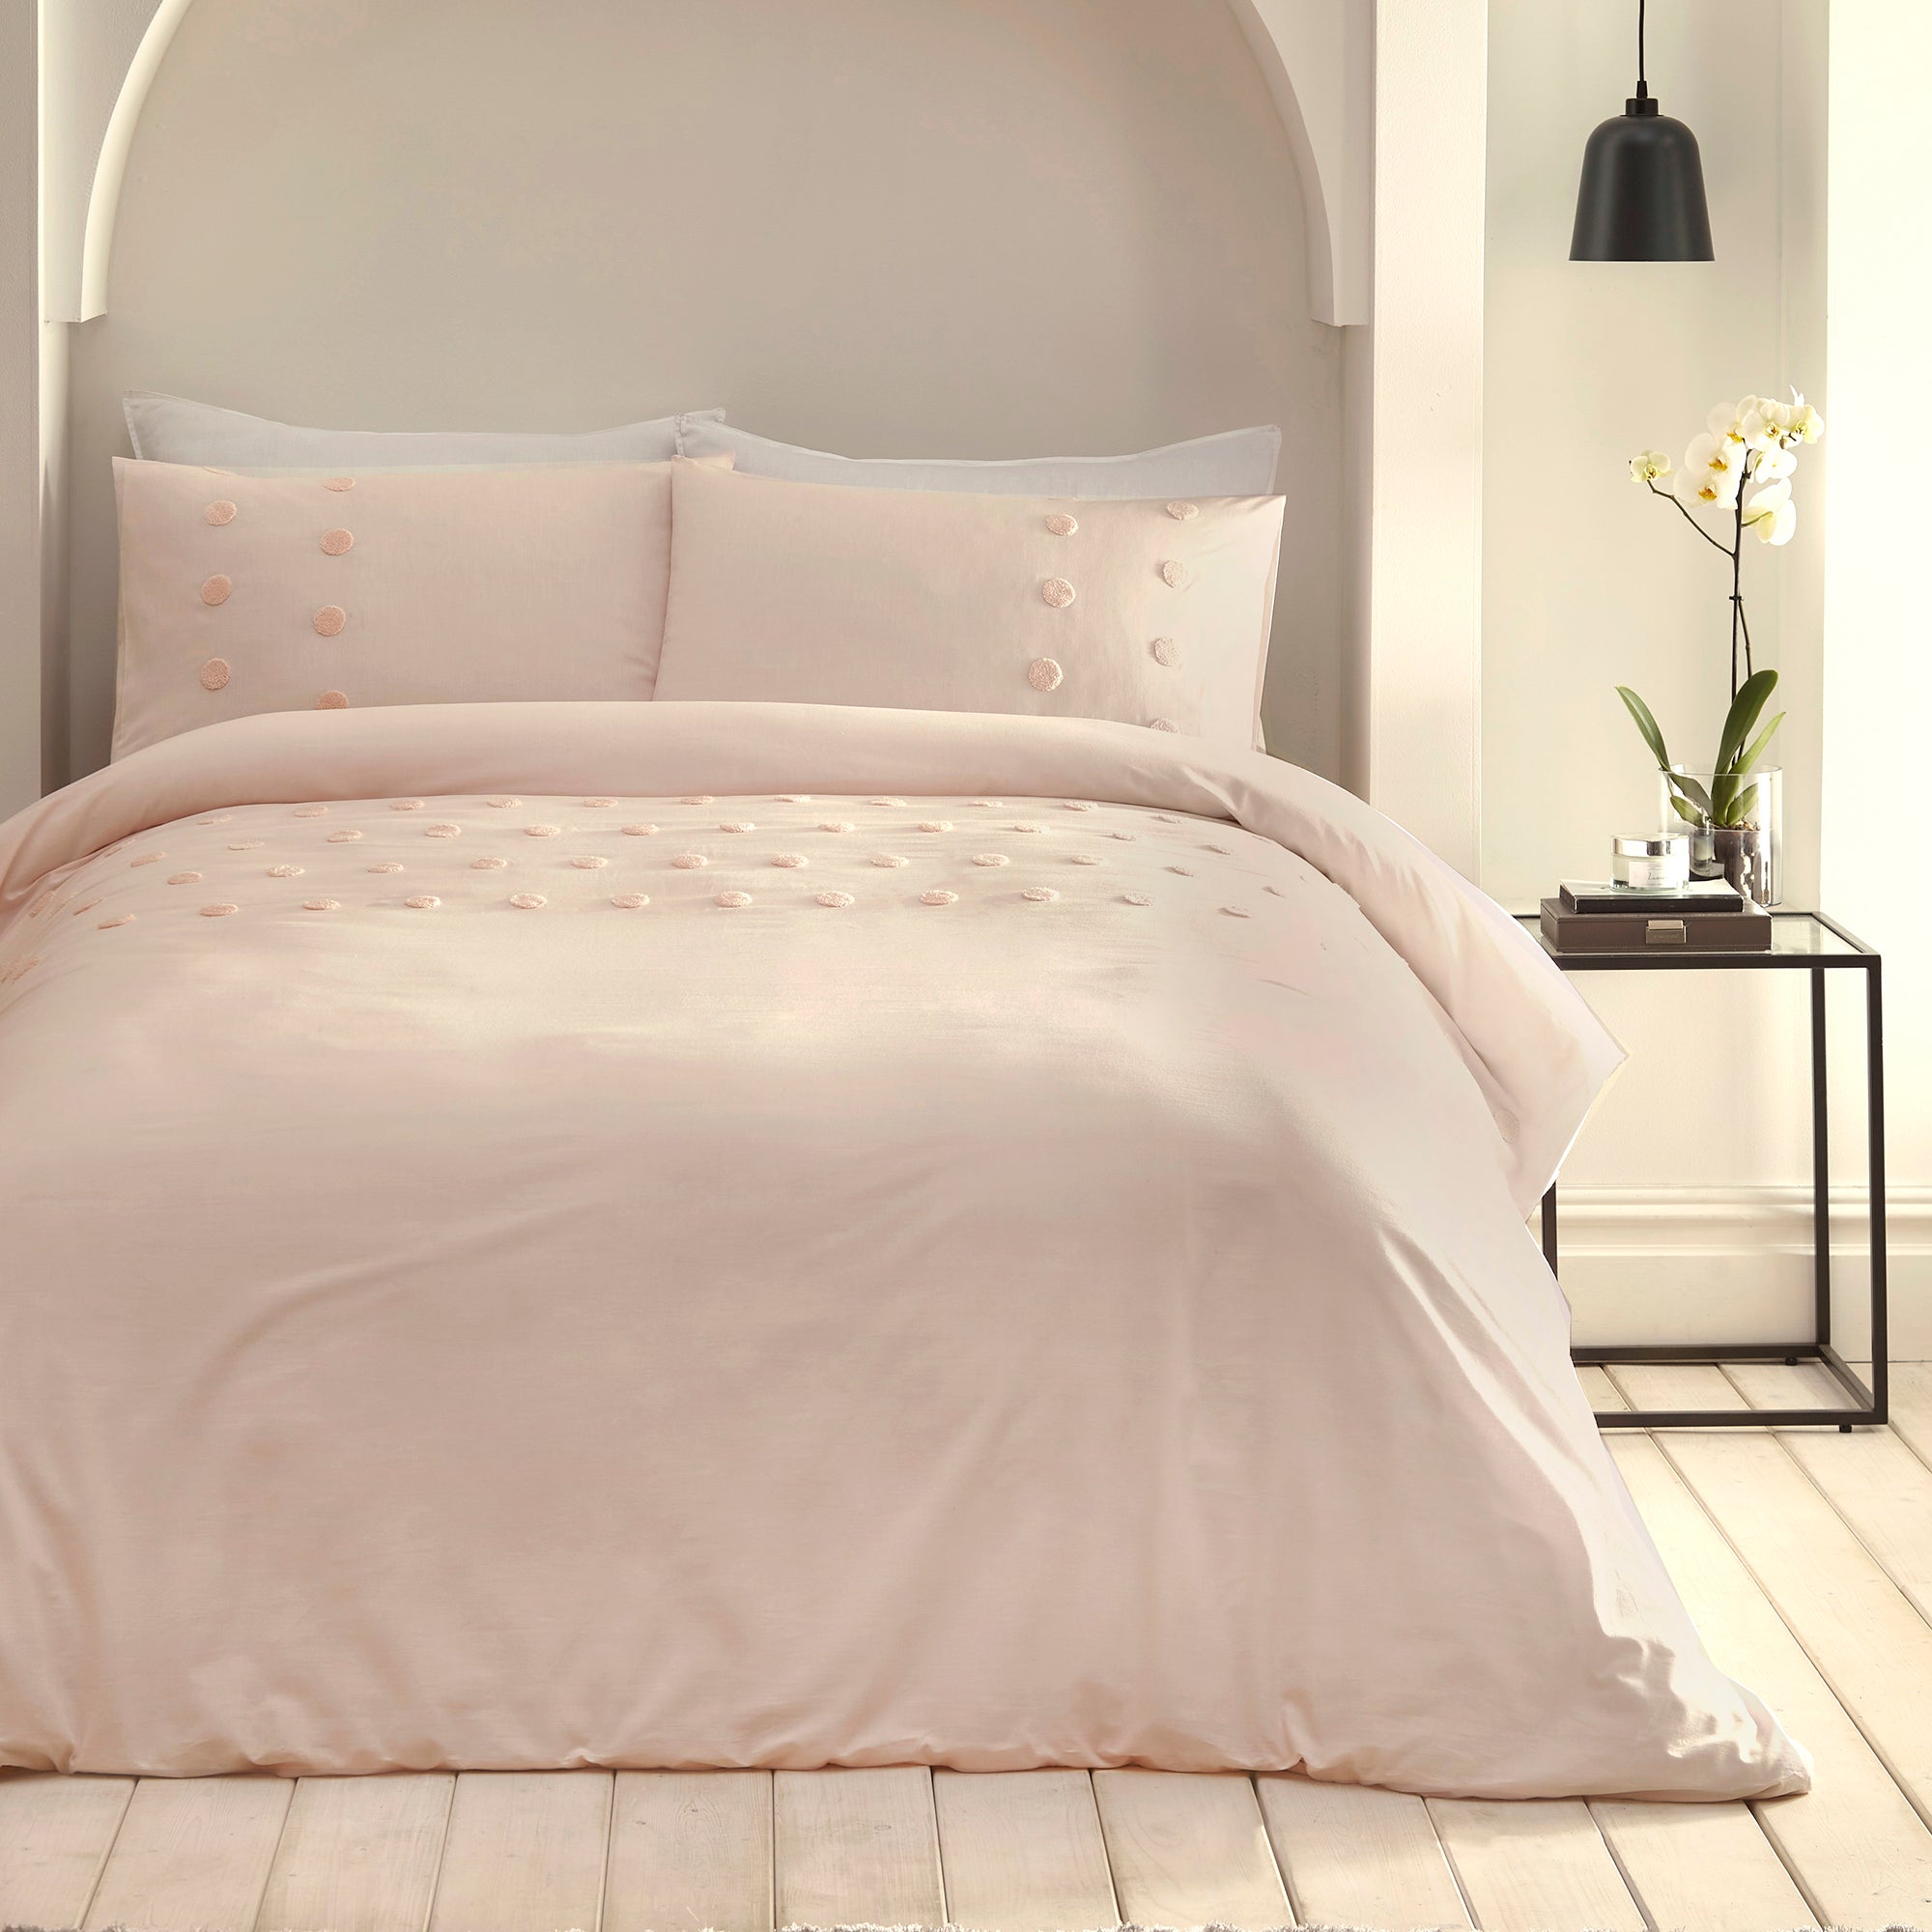 Ayda - Tufted Spots 100% Cotton Duvet Cover Set in Blush - by Appletree Boutique